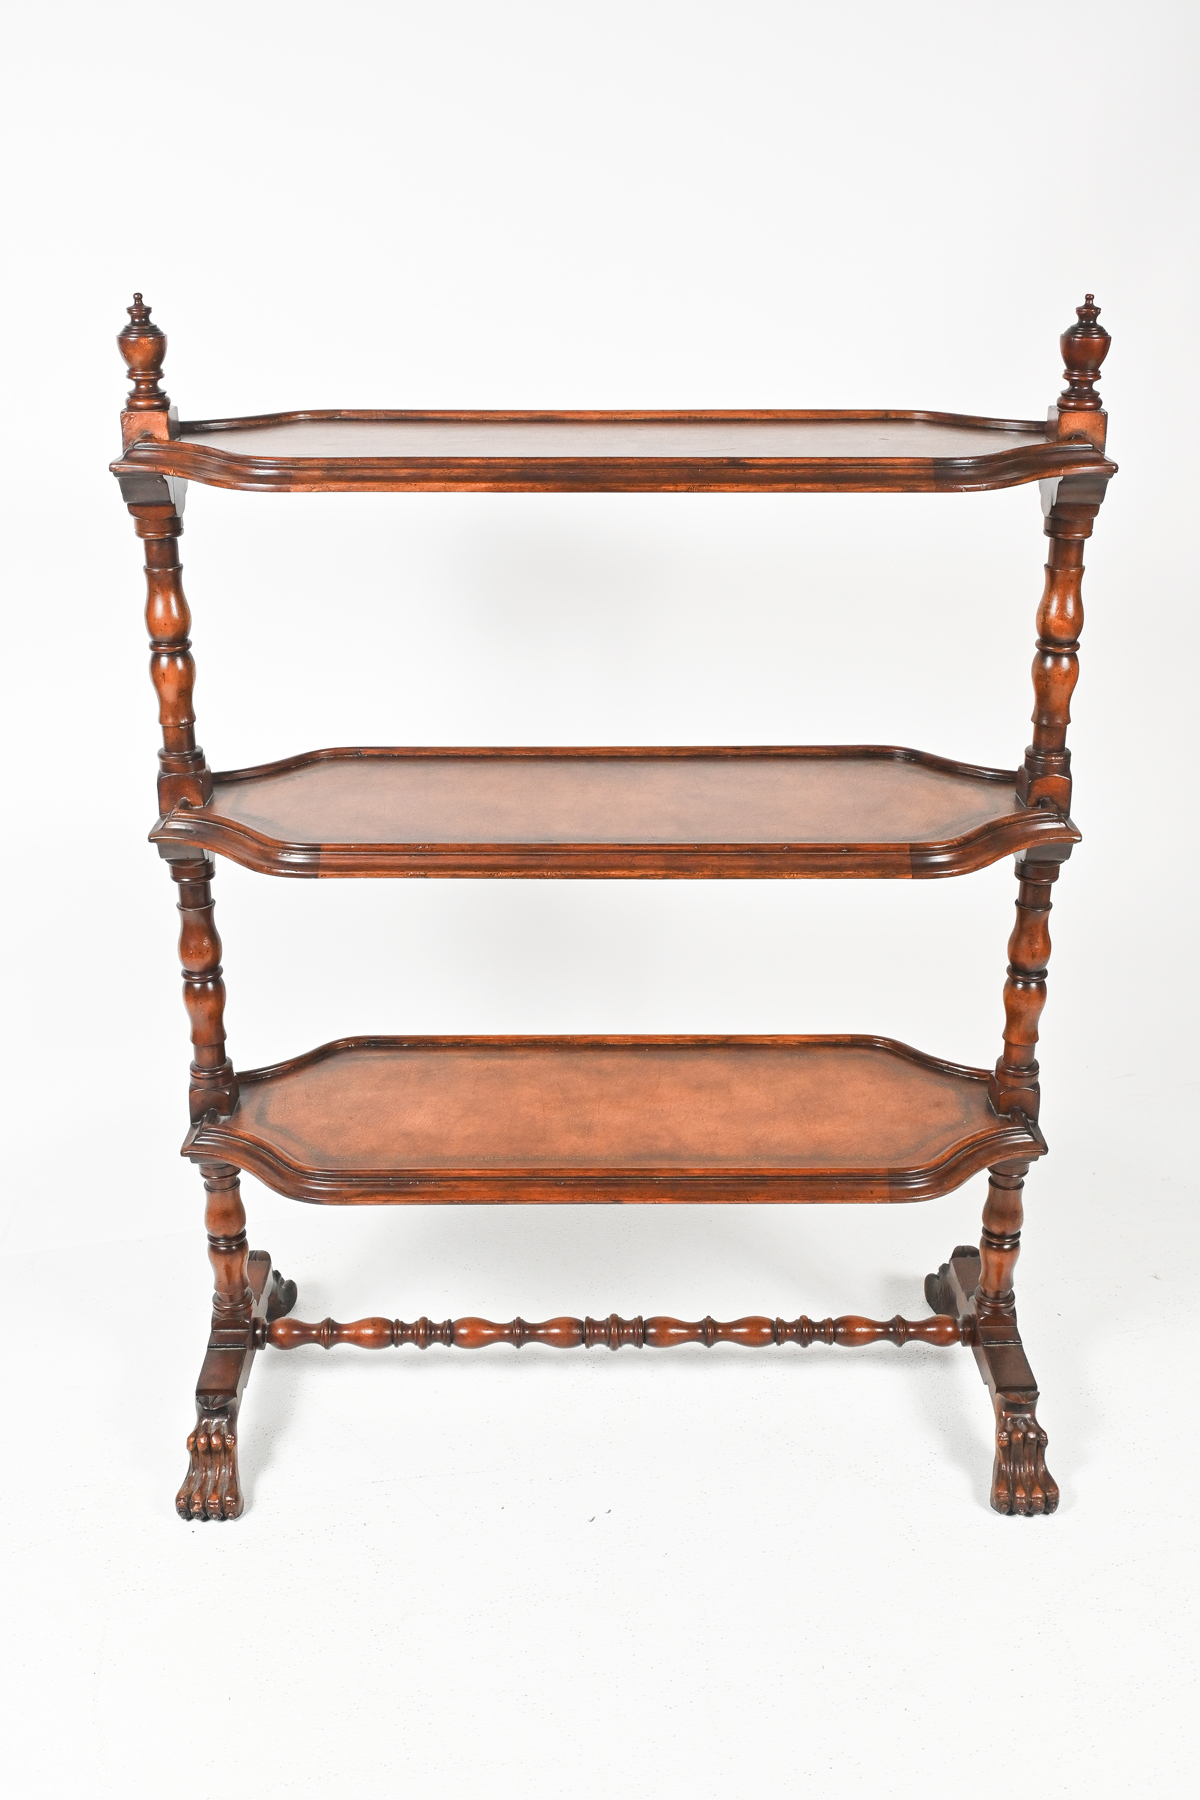 JOHN RICHARDS 3 TIER STAND A carved 30a05b